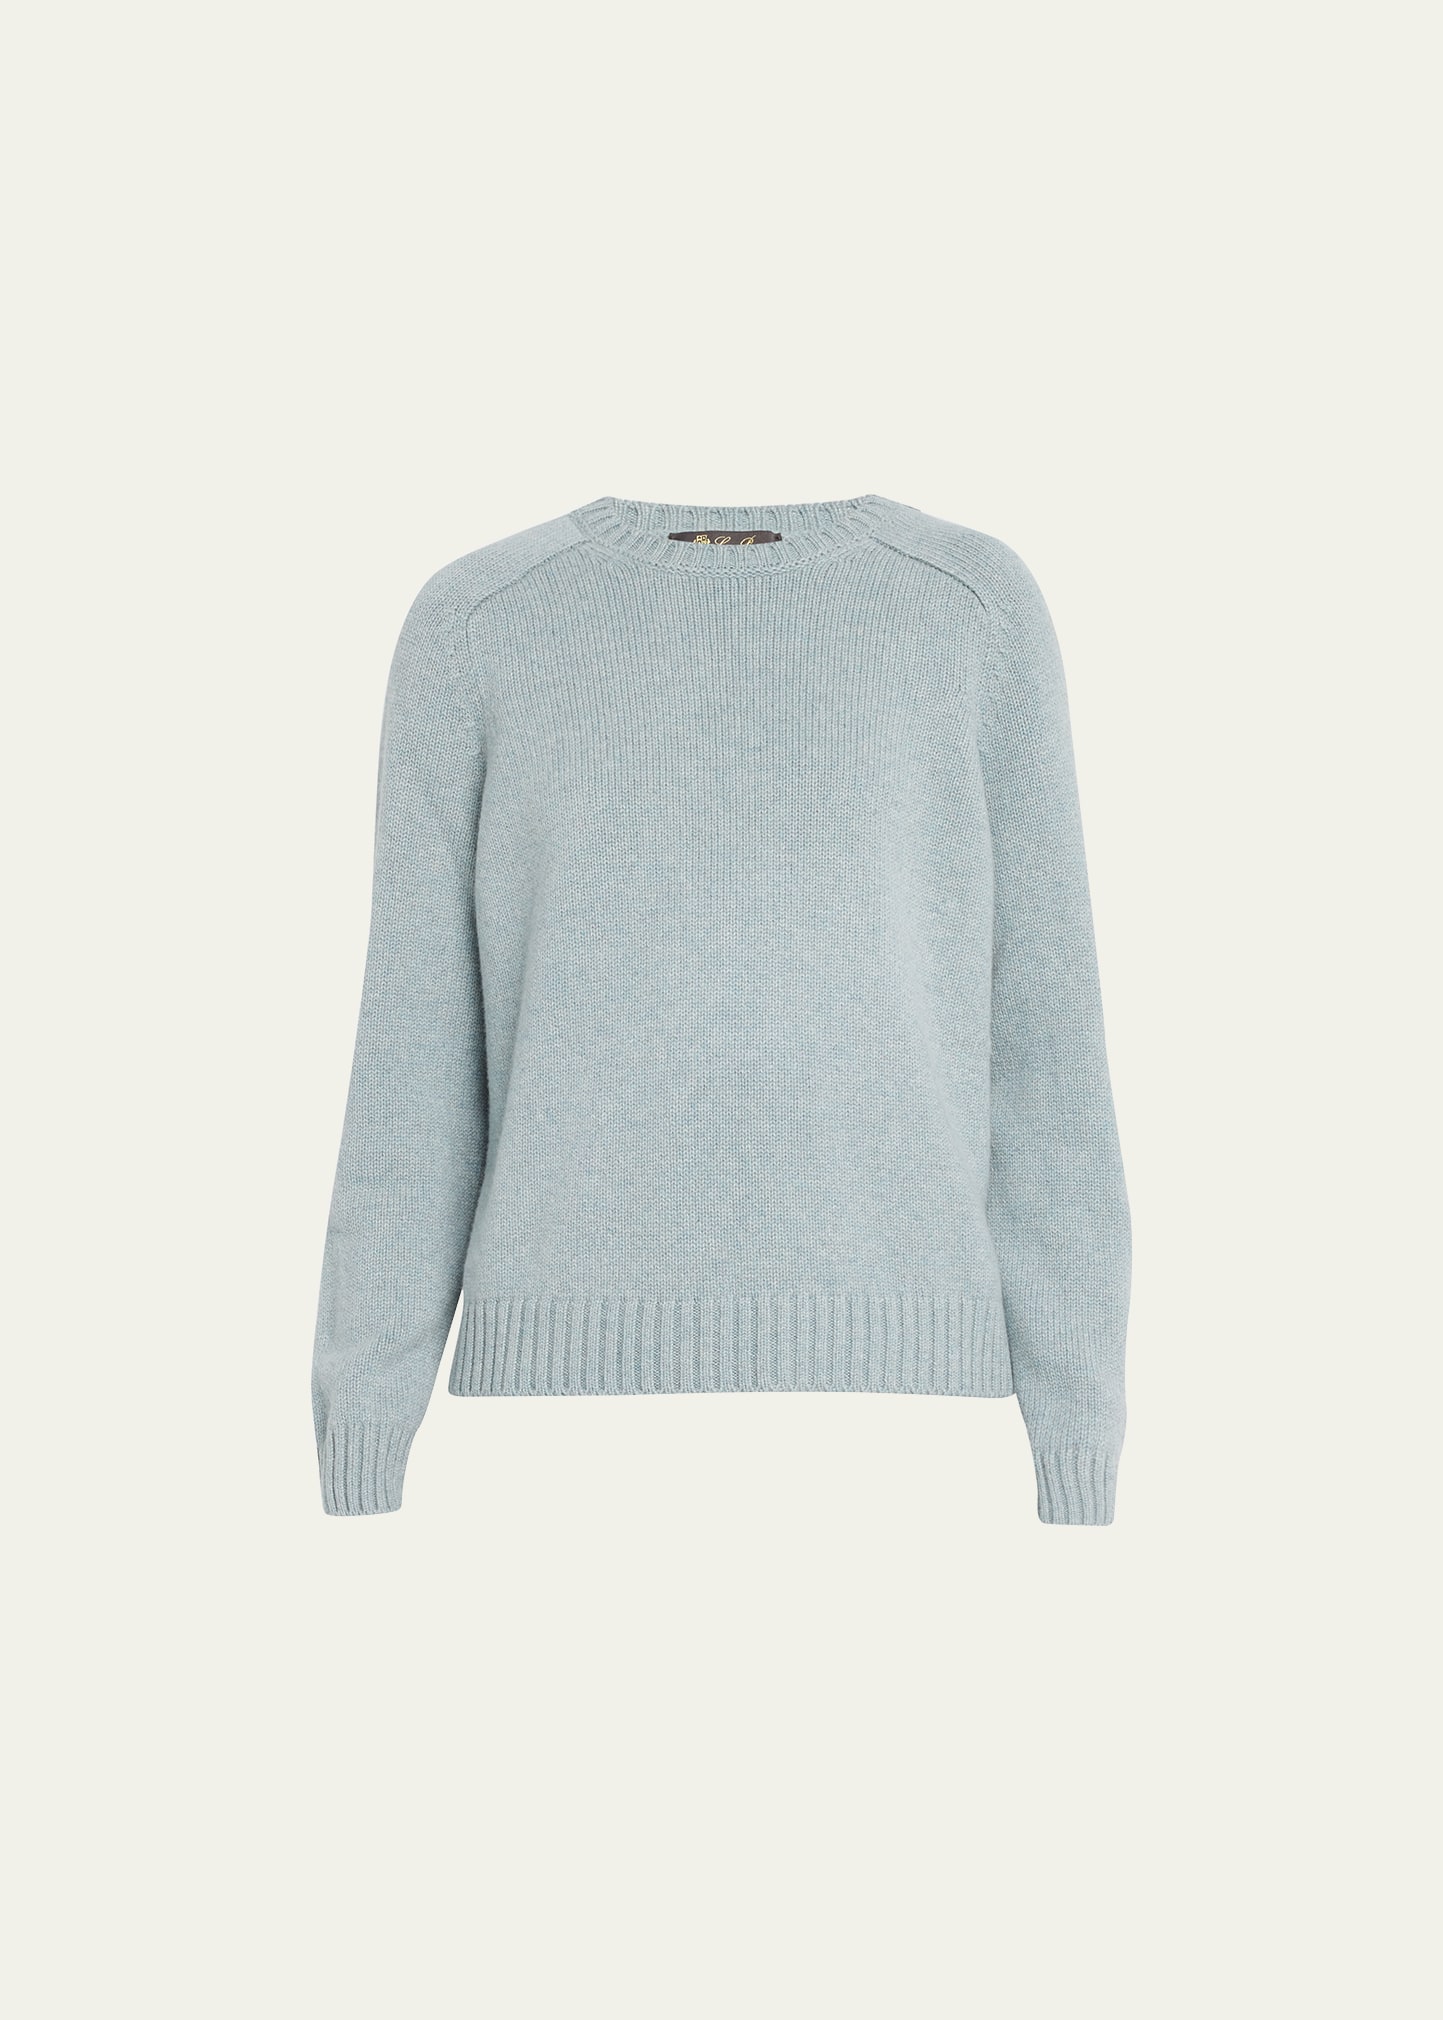 Loro Piana Neo Parksville Cashmere Crewneck Sweater In W0rp Clear Blue C